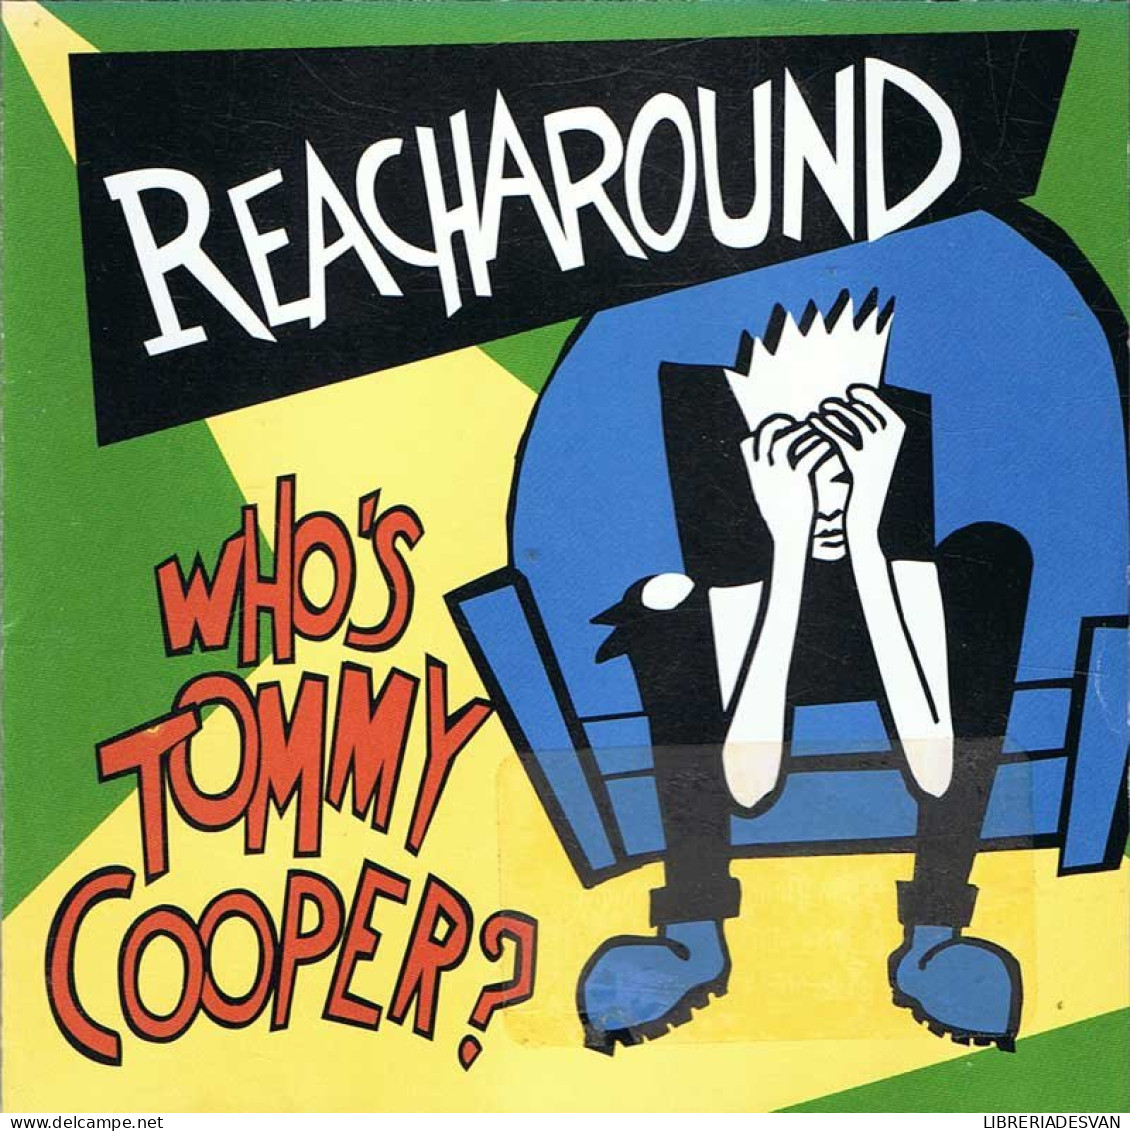 Reacharound - Who's Tommy Cooper?. CD - Rock